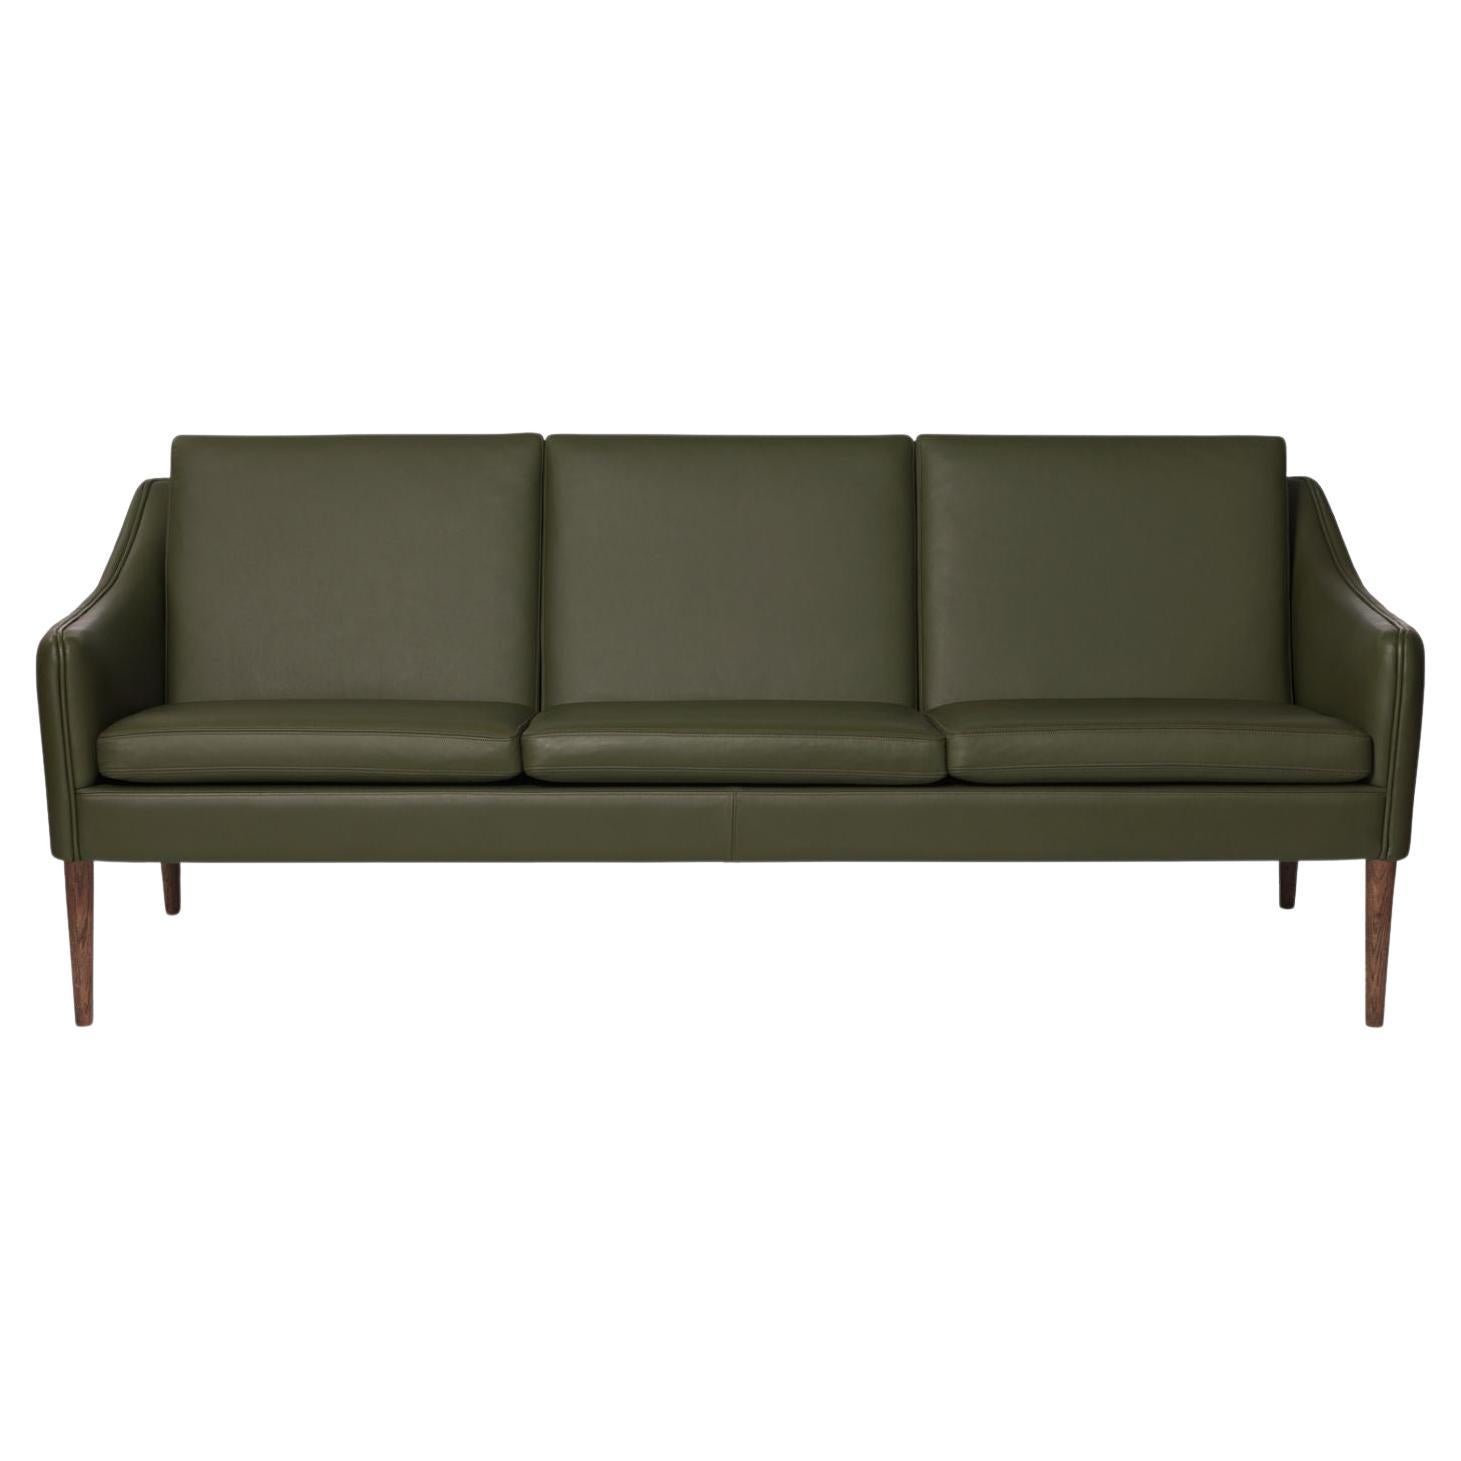 Mr Olsen 3 Seater Oak Challenger Pickle Green Leather by Warm Nordic For Sale